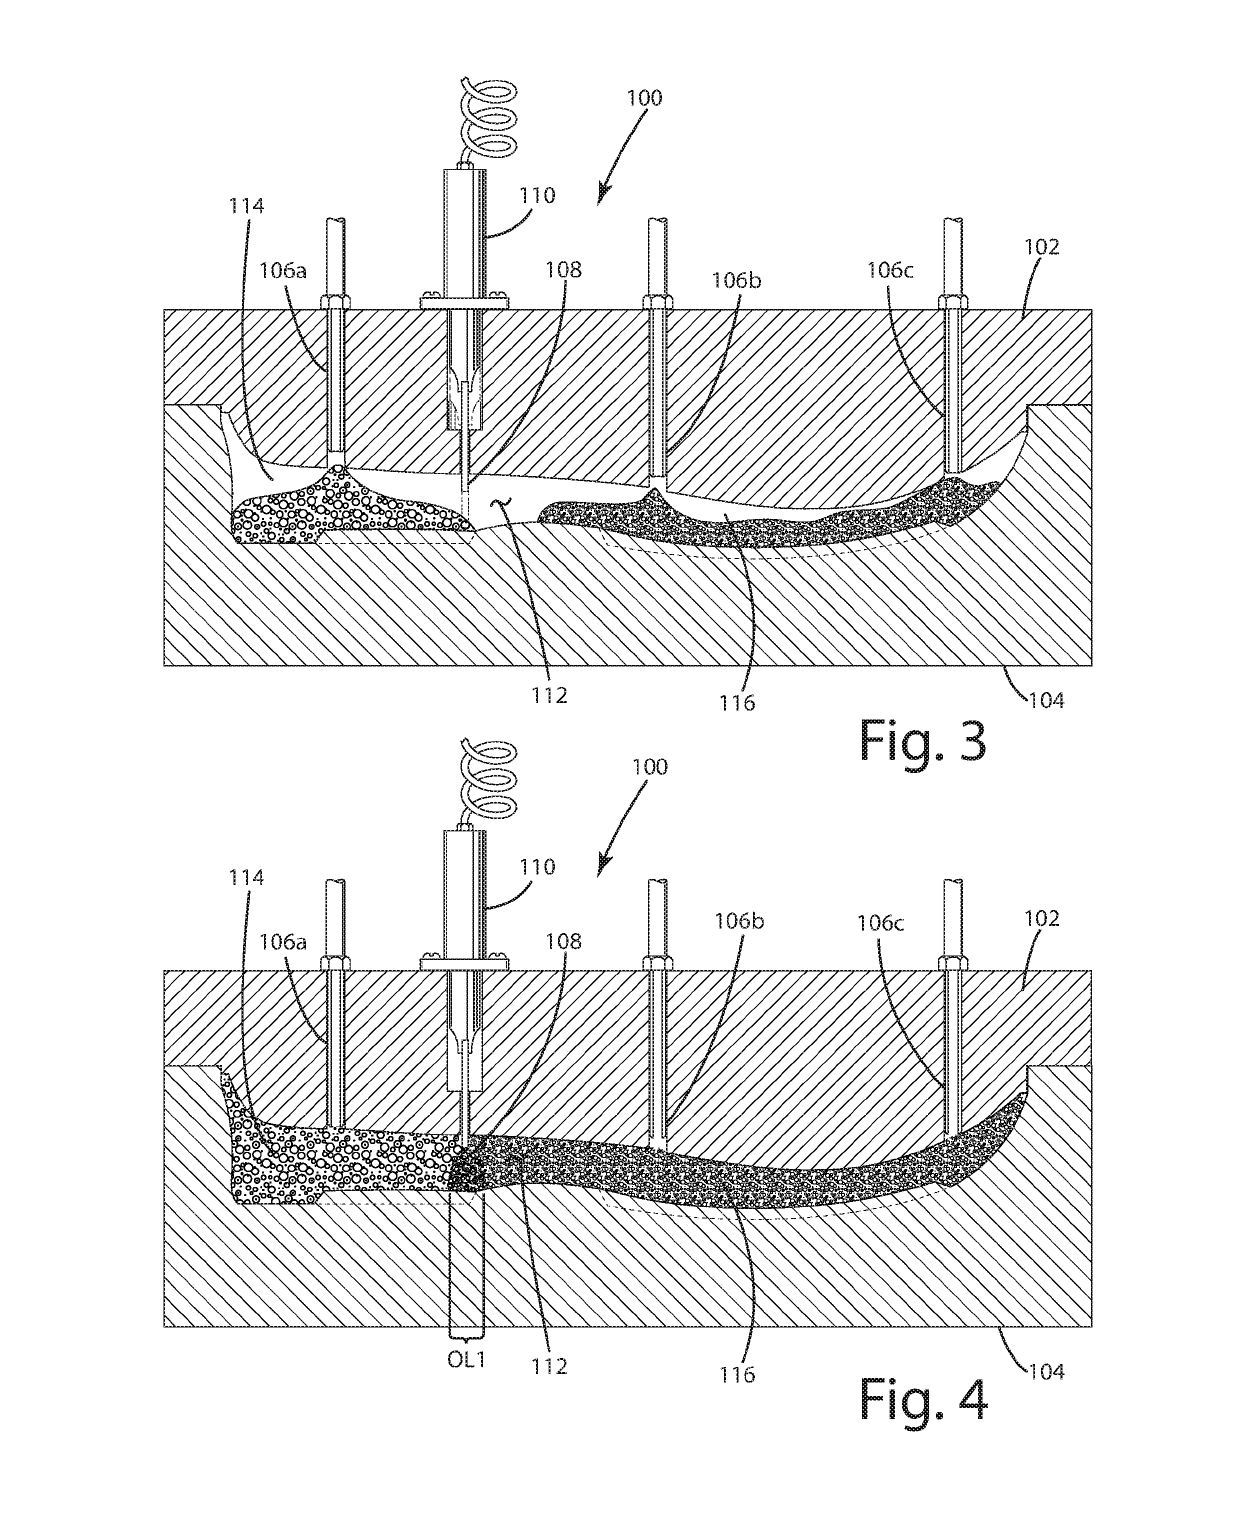 Method and apparatus for manufacturing footwear soles